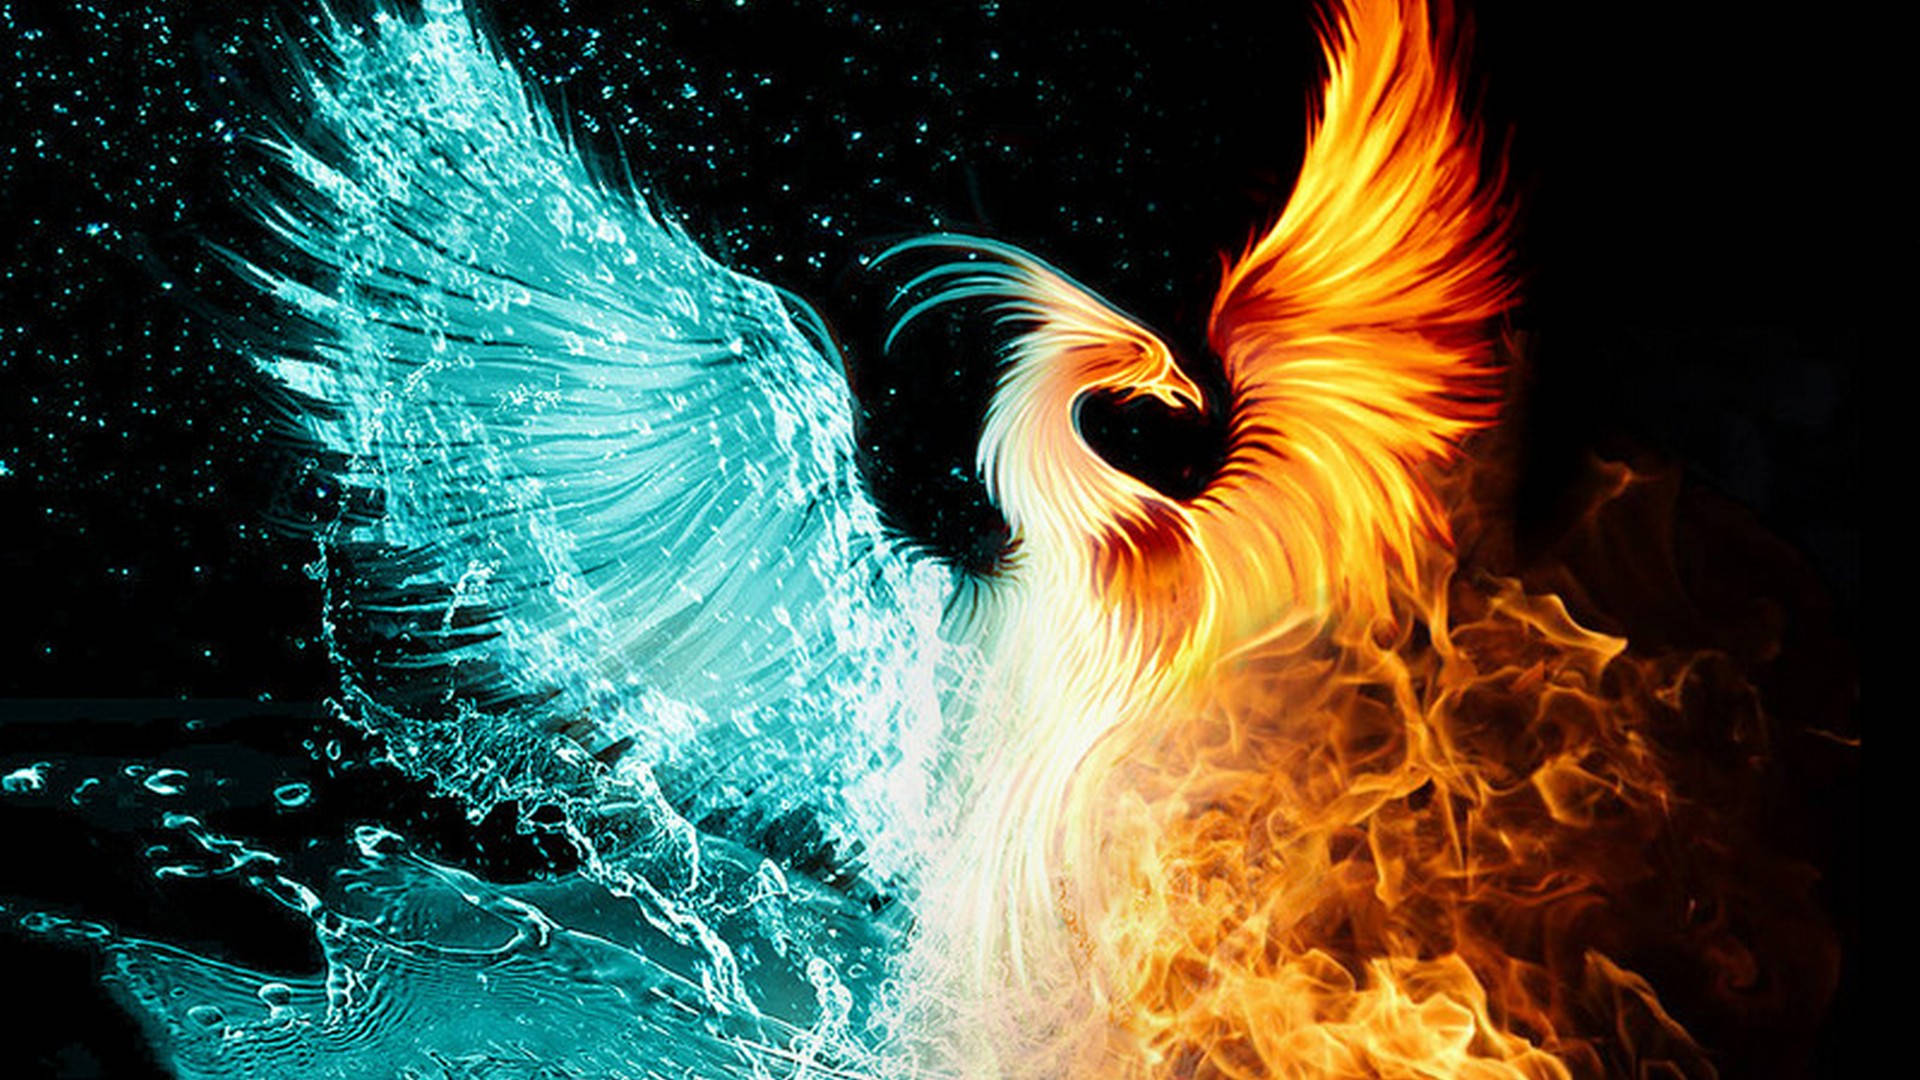 Water And Fire Wings Wallpaper